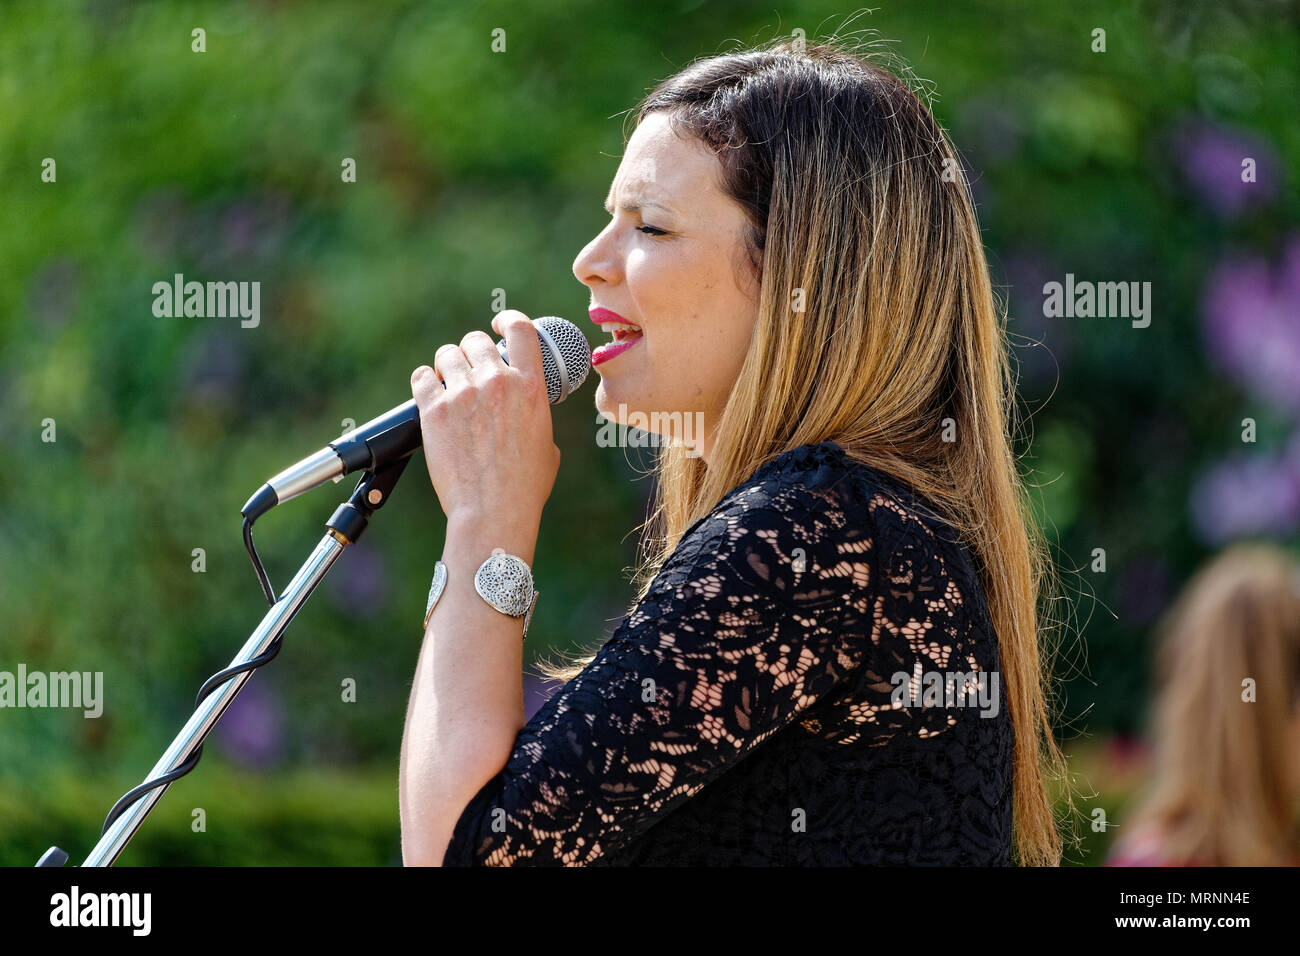 Brookwood American Military Cemetery, Surrey, UKBrookwood American Military Cemetery, Surrey, UK. Sun 27th May 2018 Brookwood American Cemetery, Surrey UK. Rosella Caruso performs 'Amazing Grace' during the ceremony. Credit: wyrdlight/Alamy Live News Stock Photo